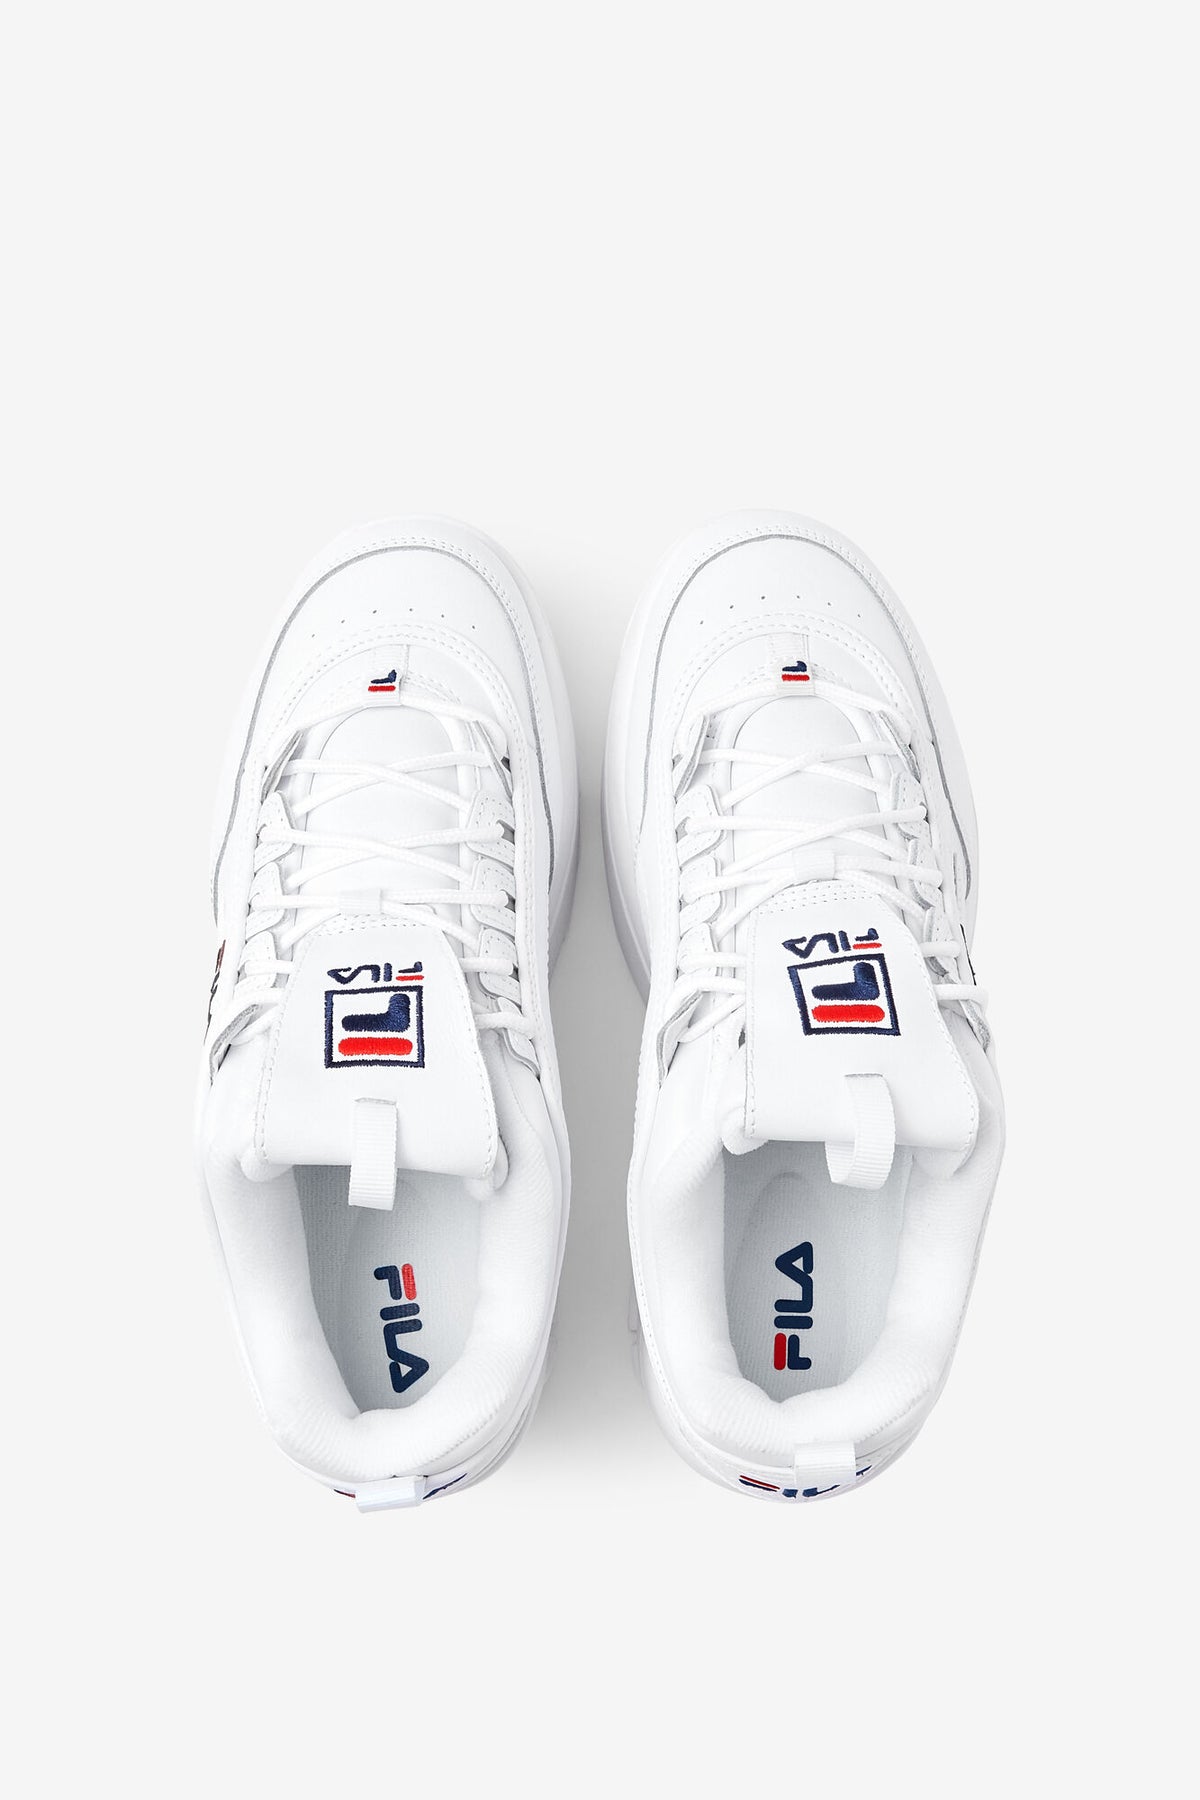 NWT FILA Disruptor 2 Premium Sneaker - Chunky Design, Aggressively Lugged  Outsole